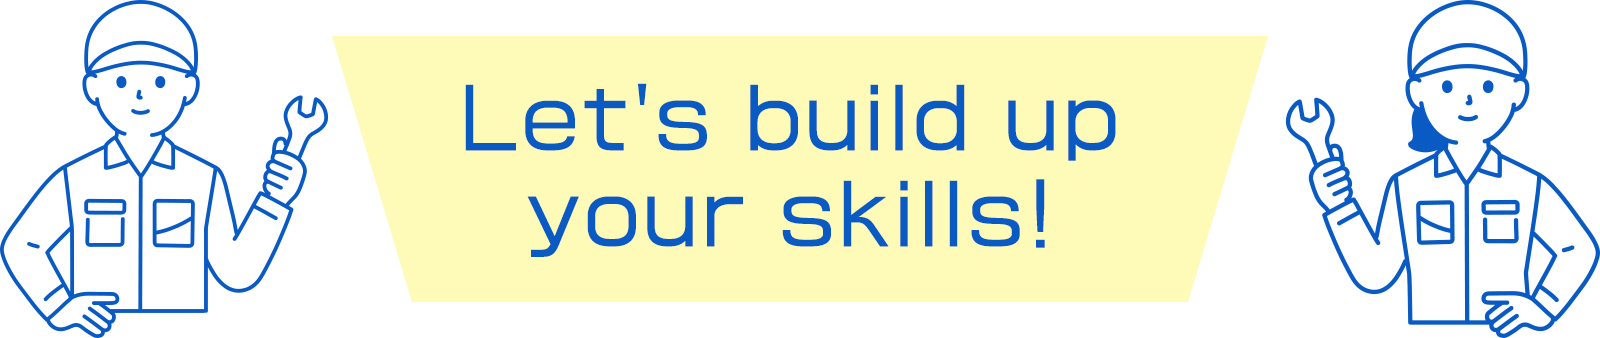 Let's build up your skills!